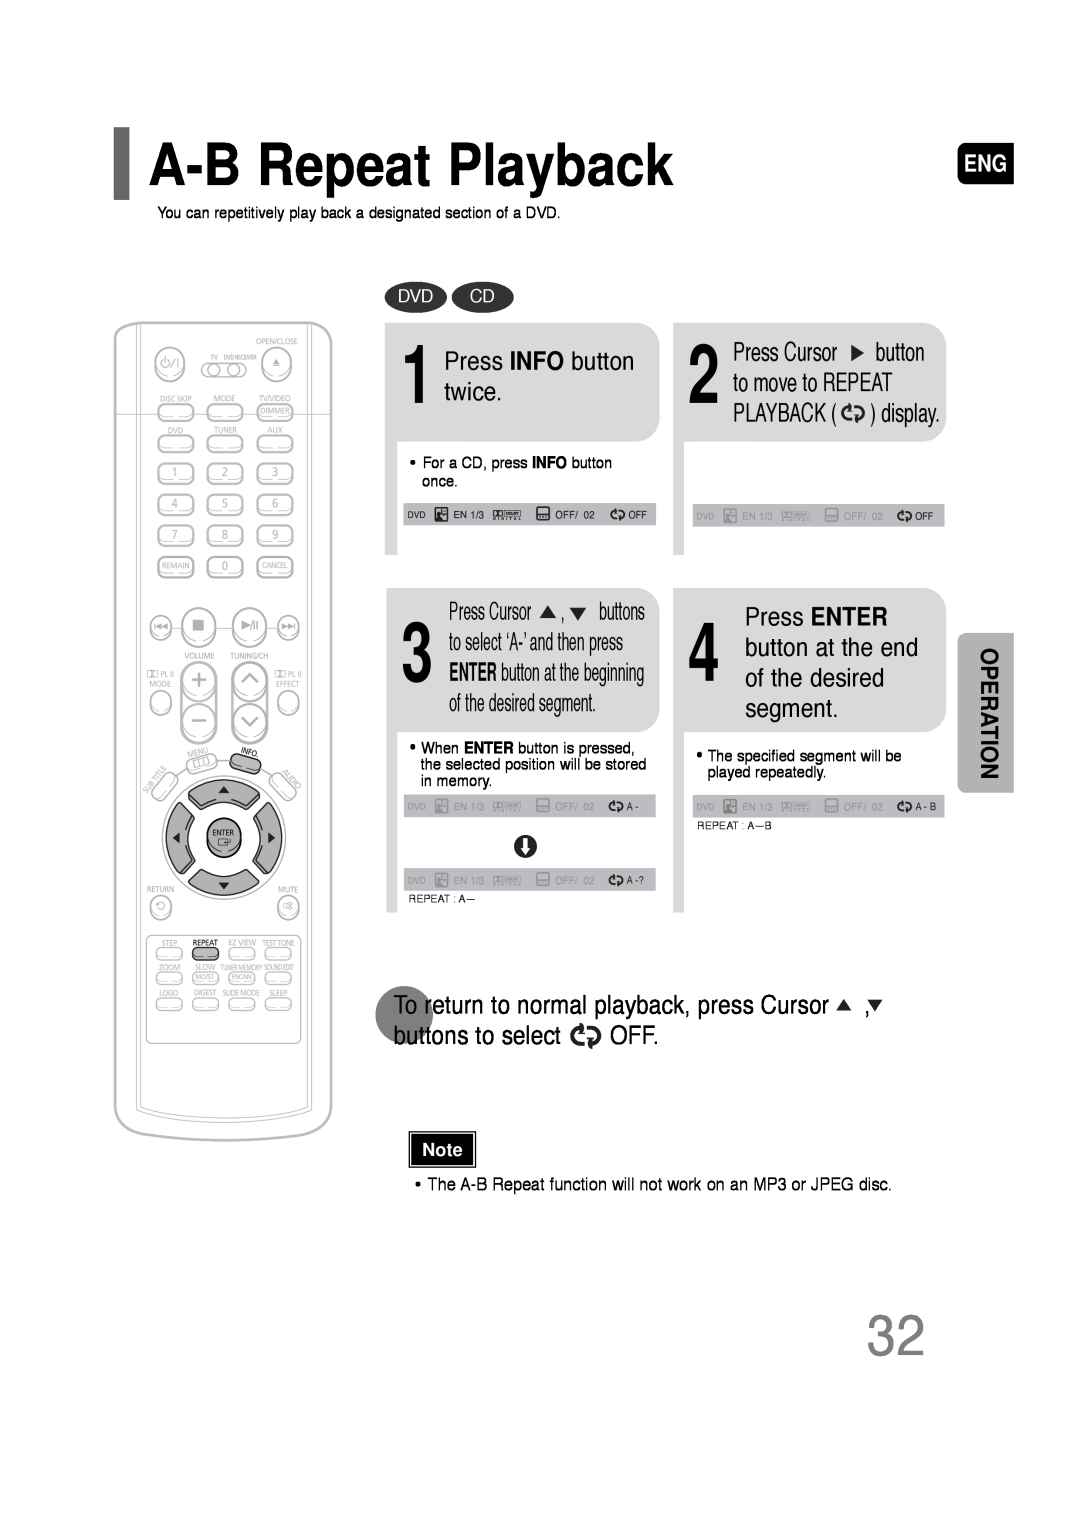 Samsung AH68-01701V A-BRepeat Playback, Press INFO button twice, Press ENTER, button at the end of the desired segment 